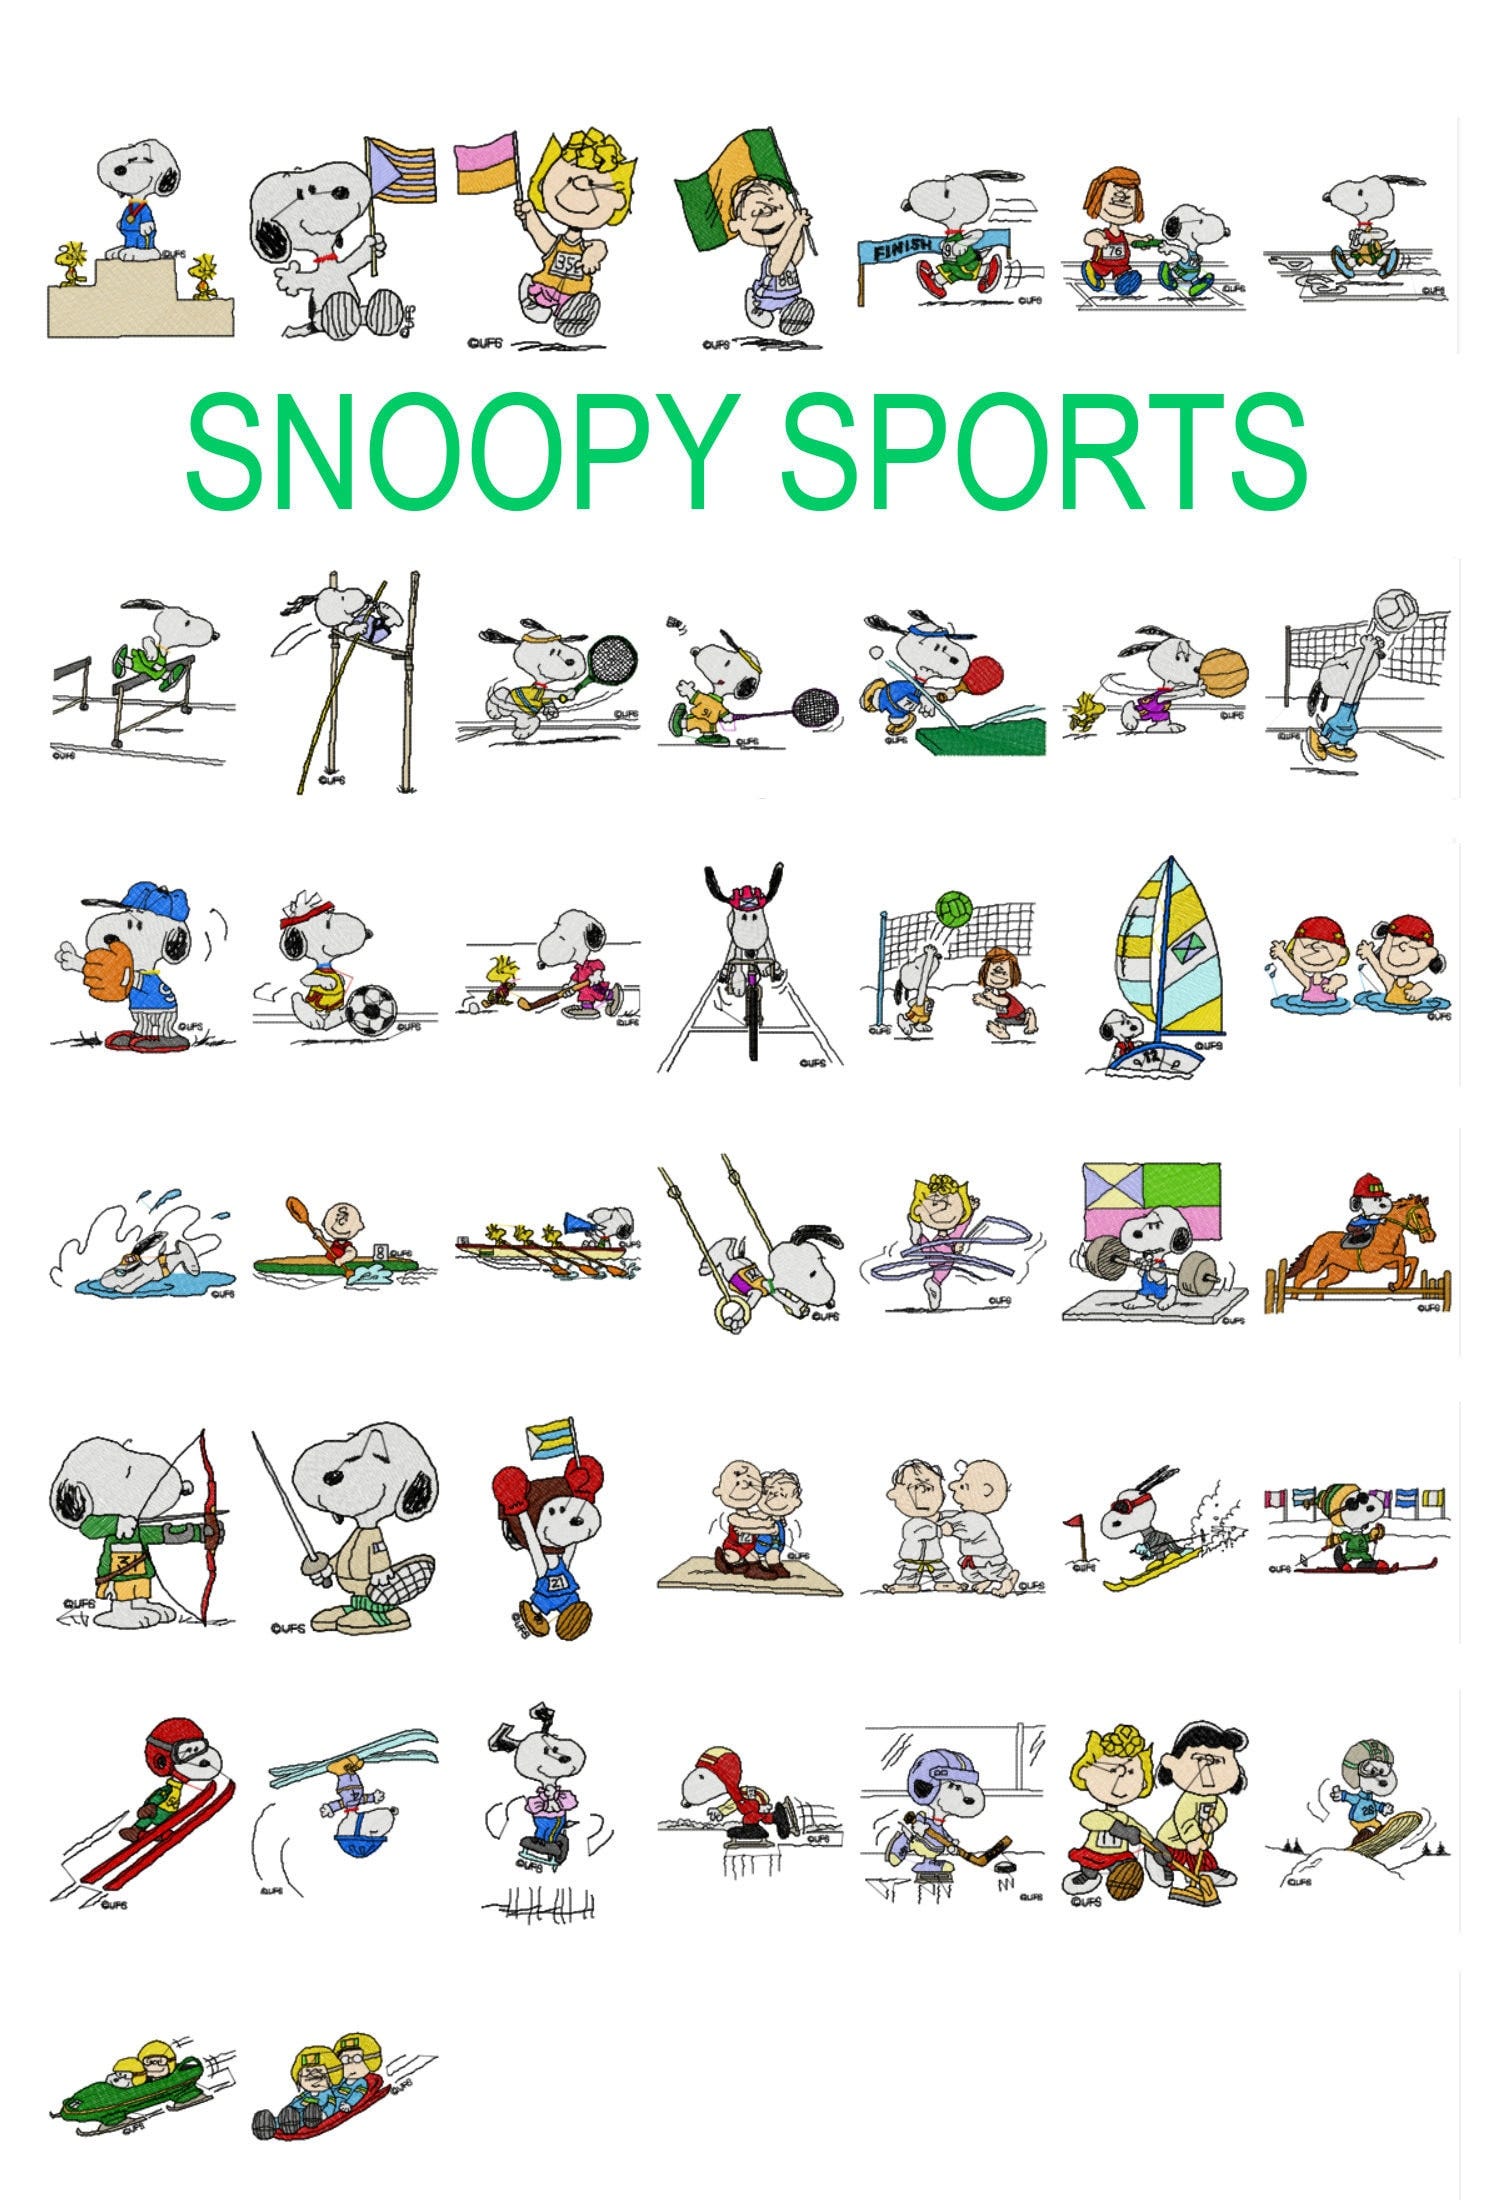 44 Snoopy machine embroidery designs, peanuts embroidery, woodstock pattern, charlie brown, patty linus, sports swimming soccer gymnastics,